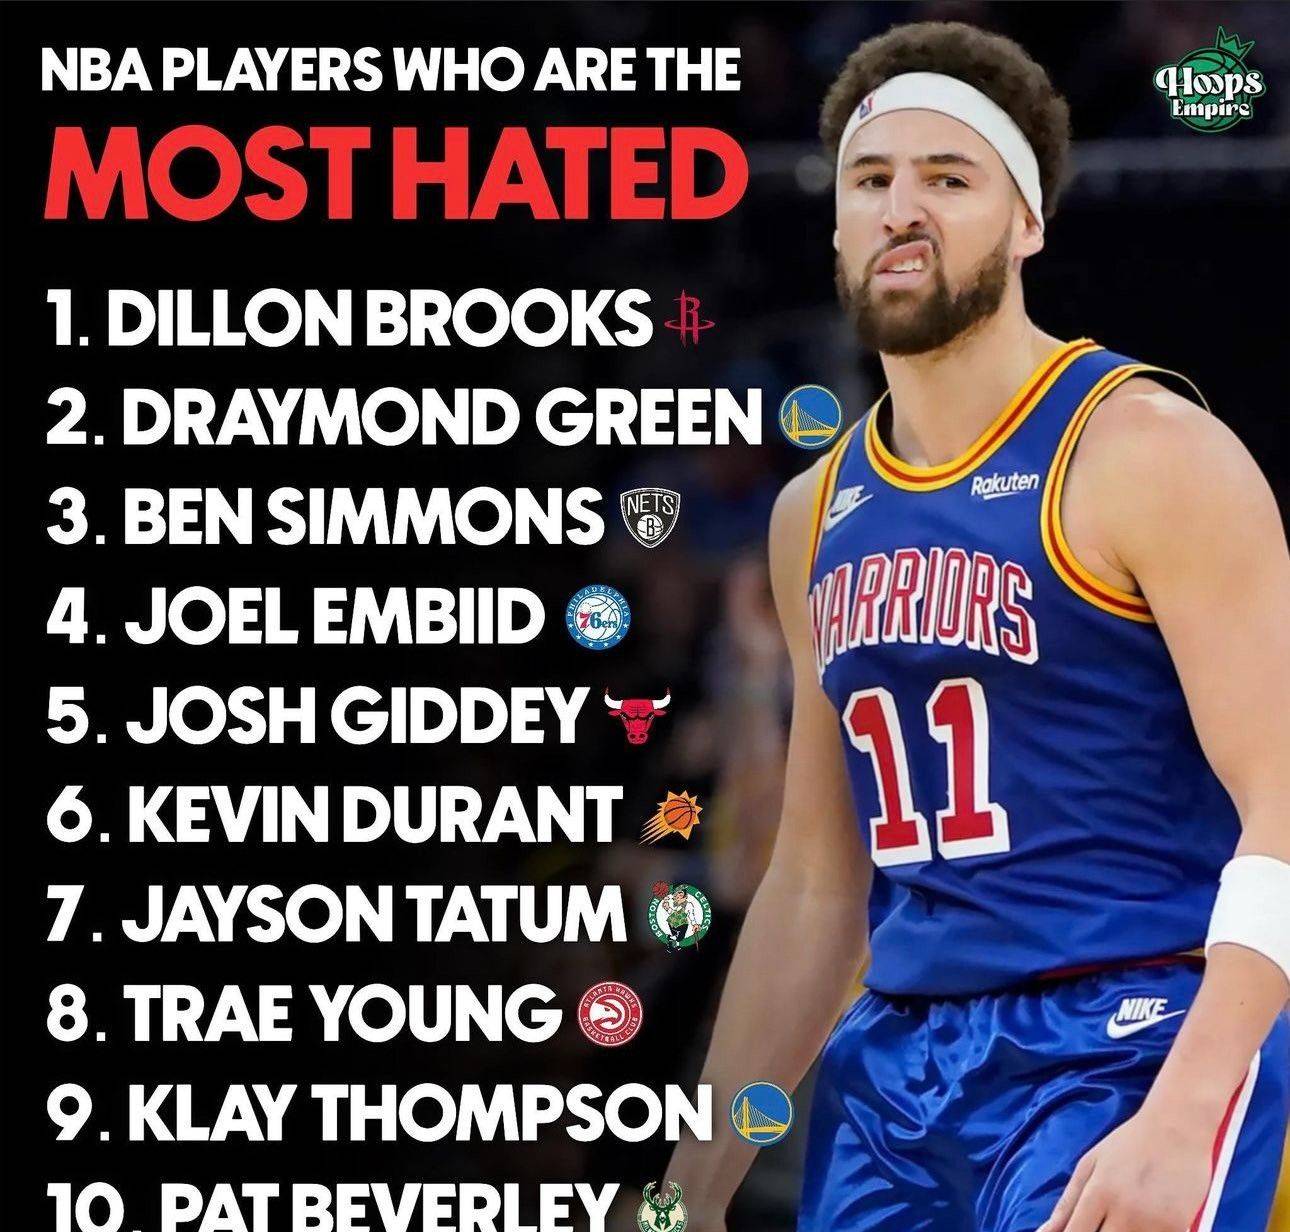 US Media's Most Hated NBA Players: Dillon, Draymond, Simmons Top Three, Embiid Fourth, Curry Ninth